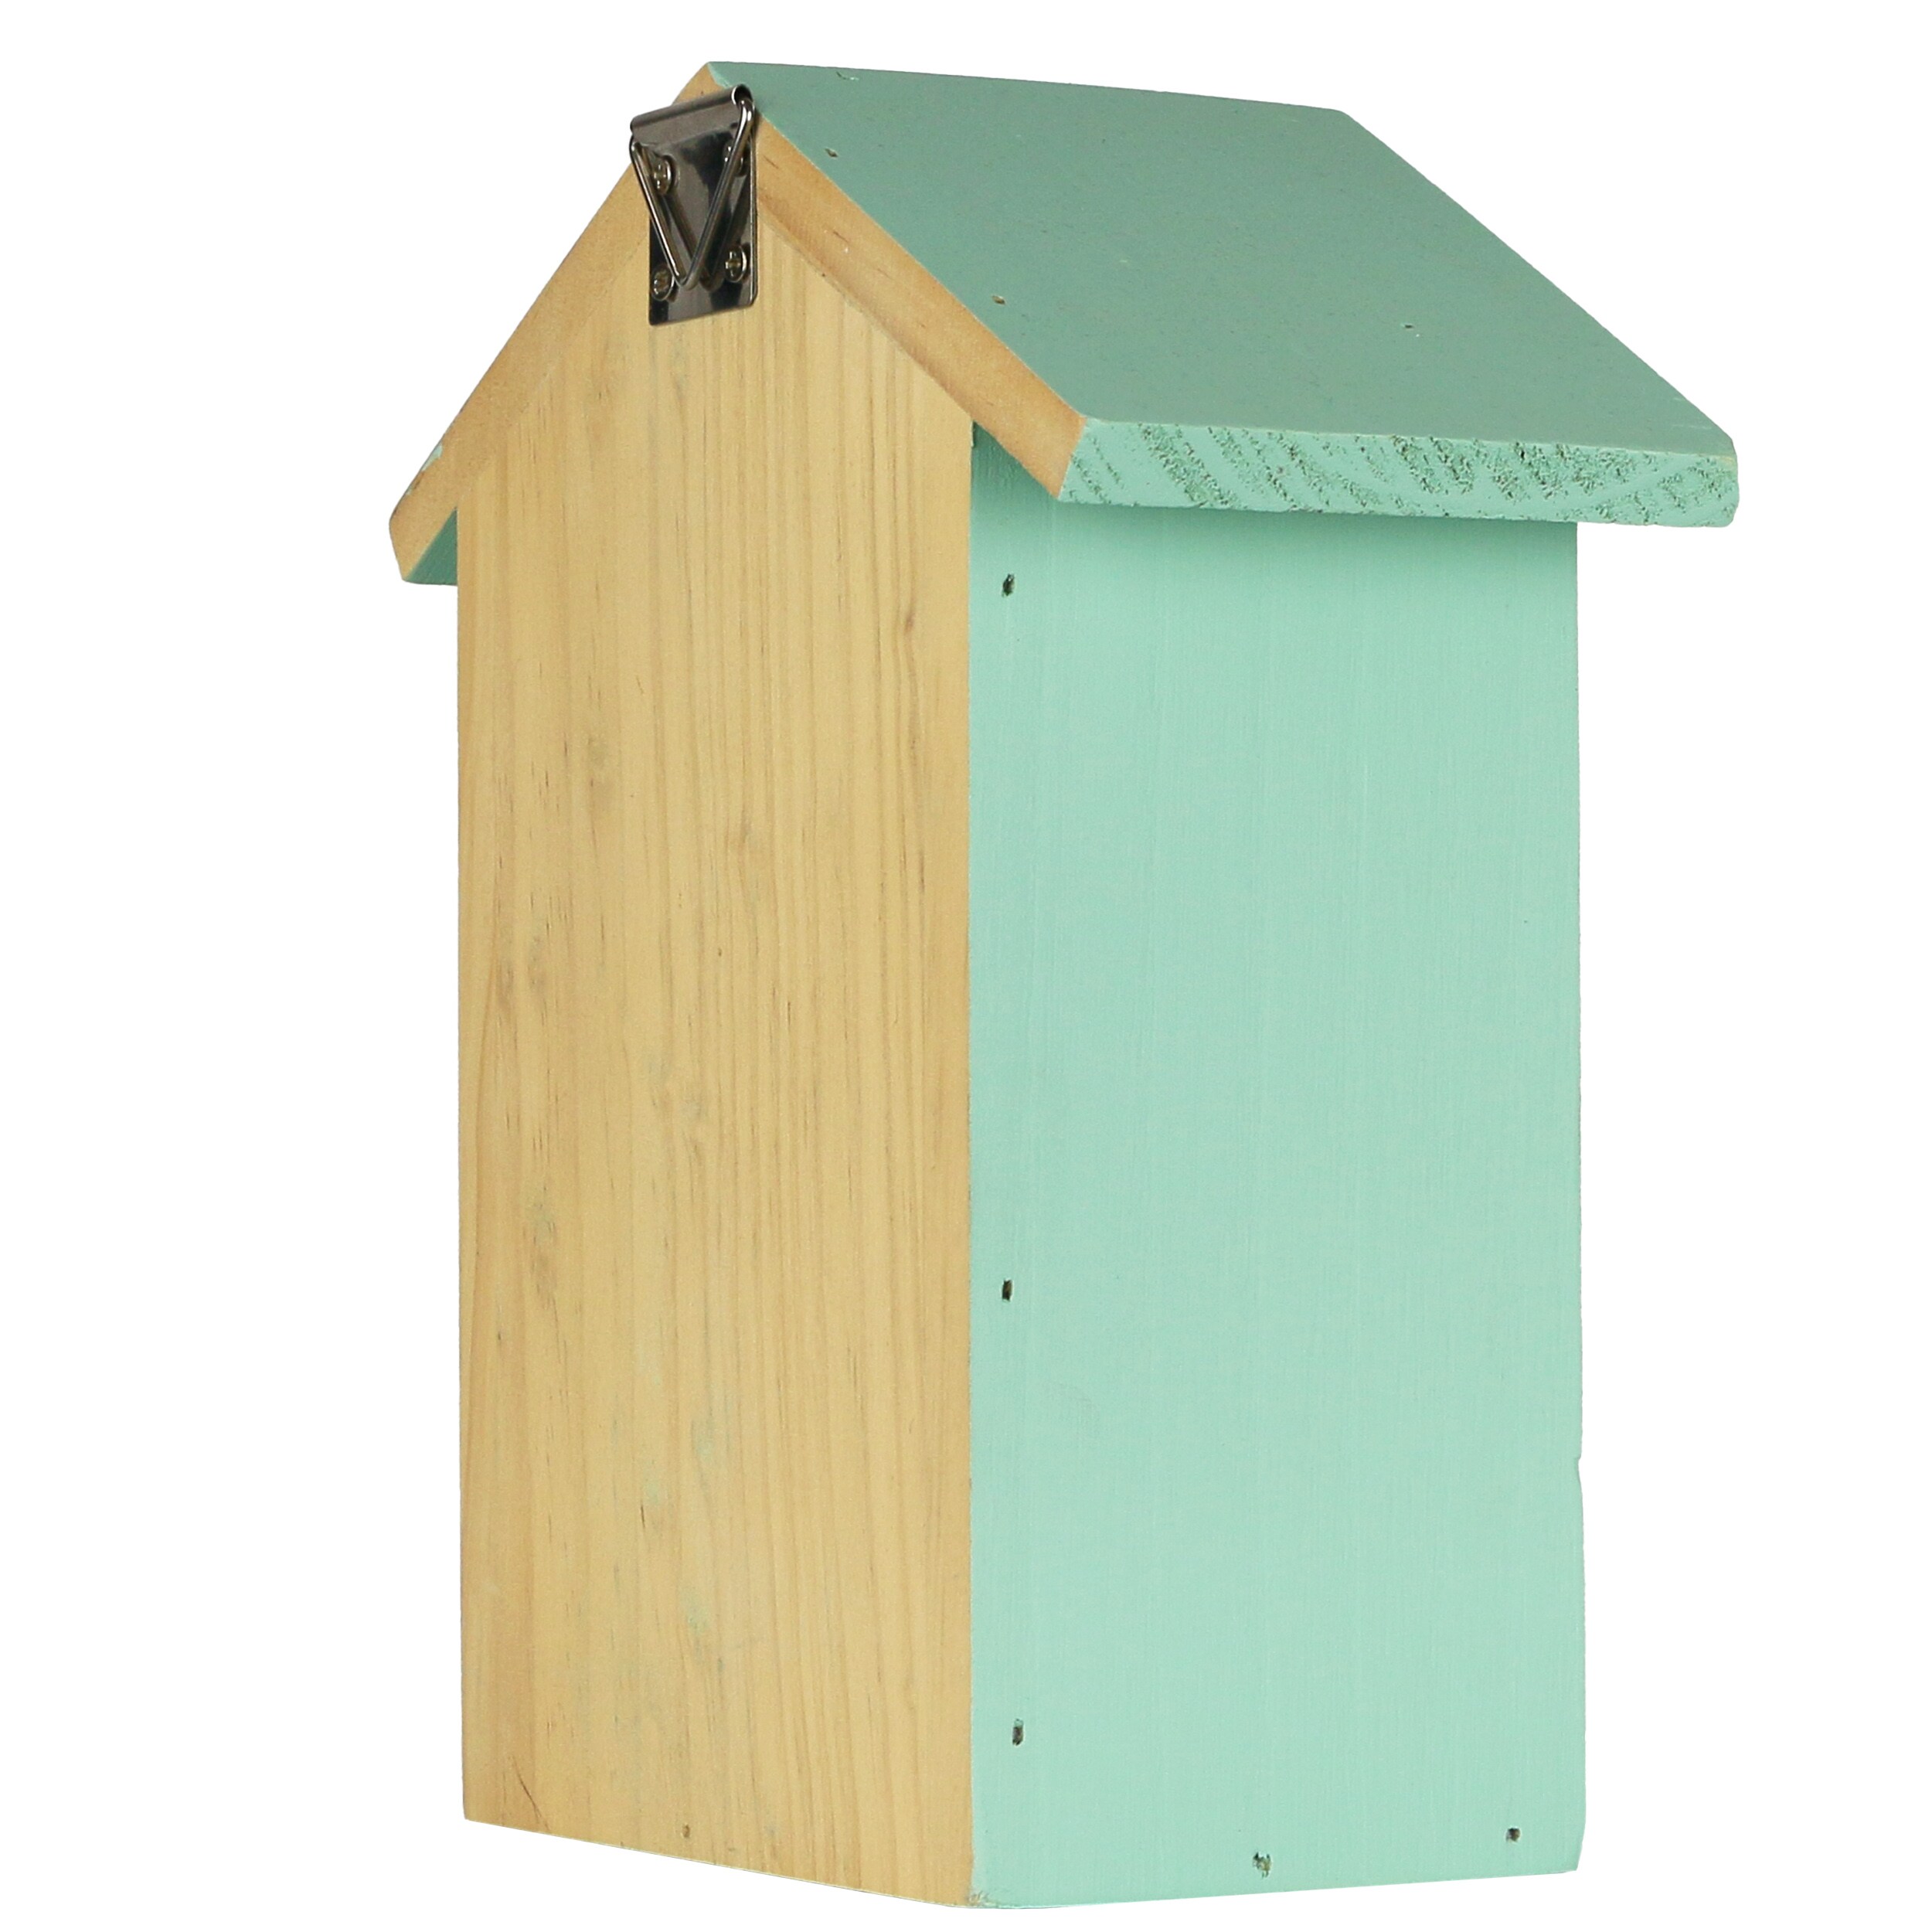 Nature's Way Green Pine Flush-mount Bee House at Lowes.com